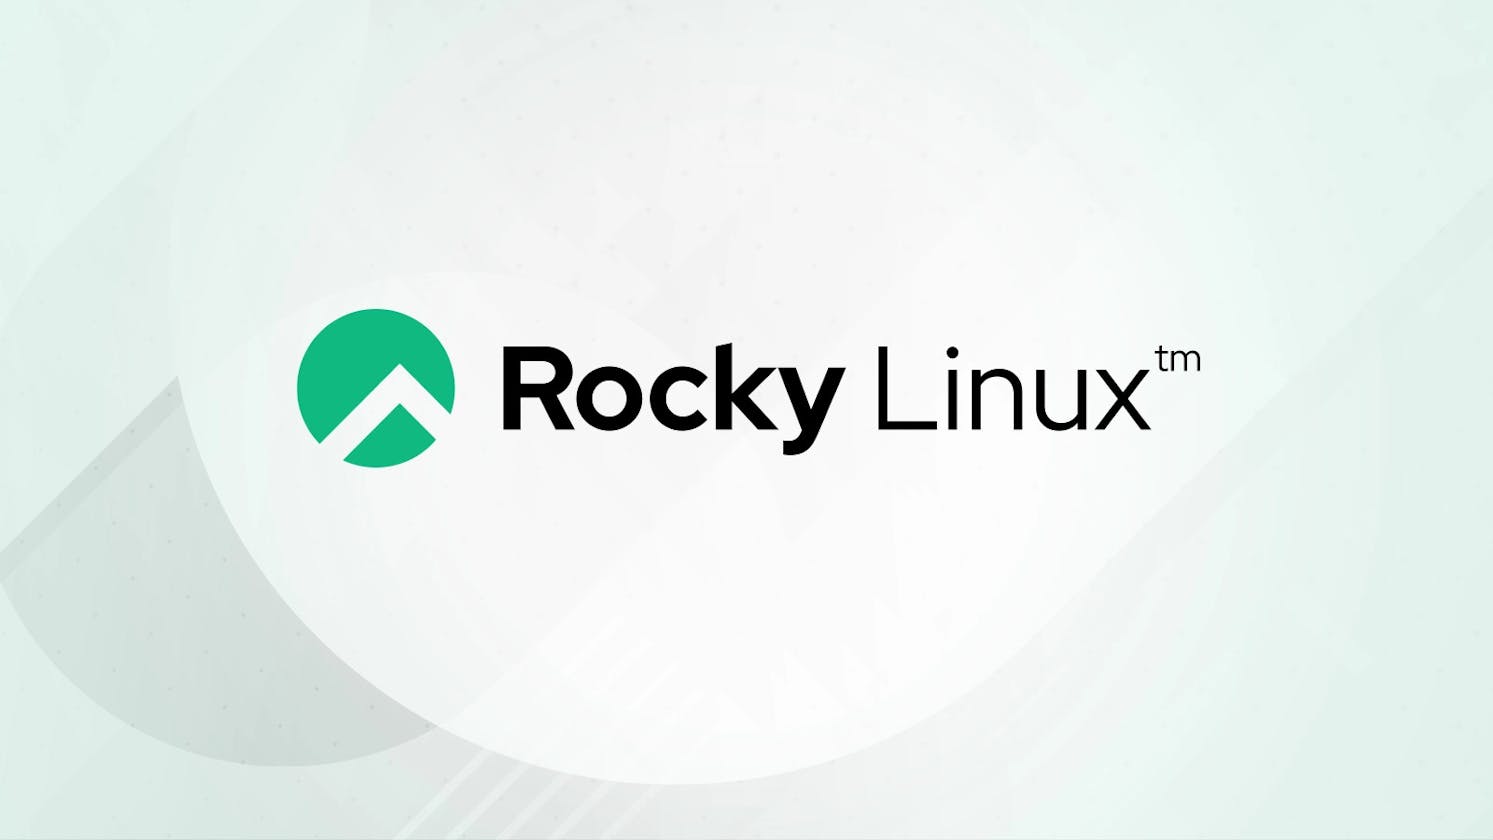 Cloud-init enabled Rocky-Linux 8 template for Proxmox to facilitate automatic instance deploy by Terraform